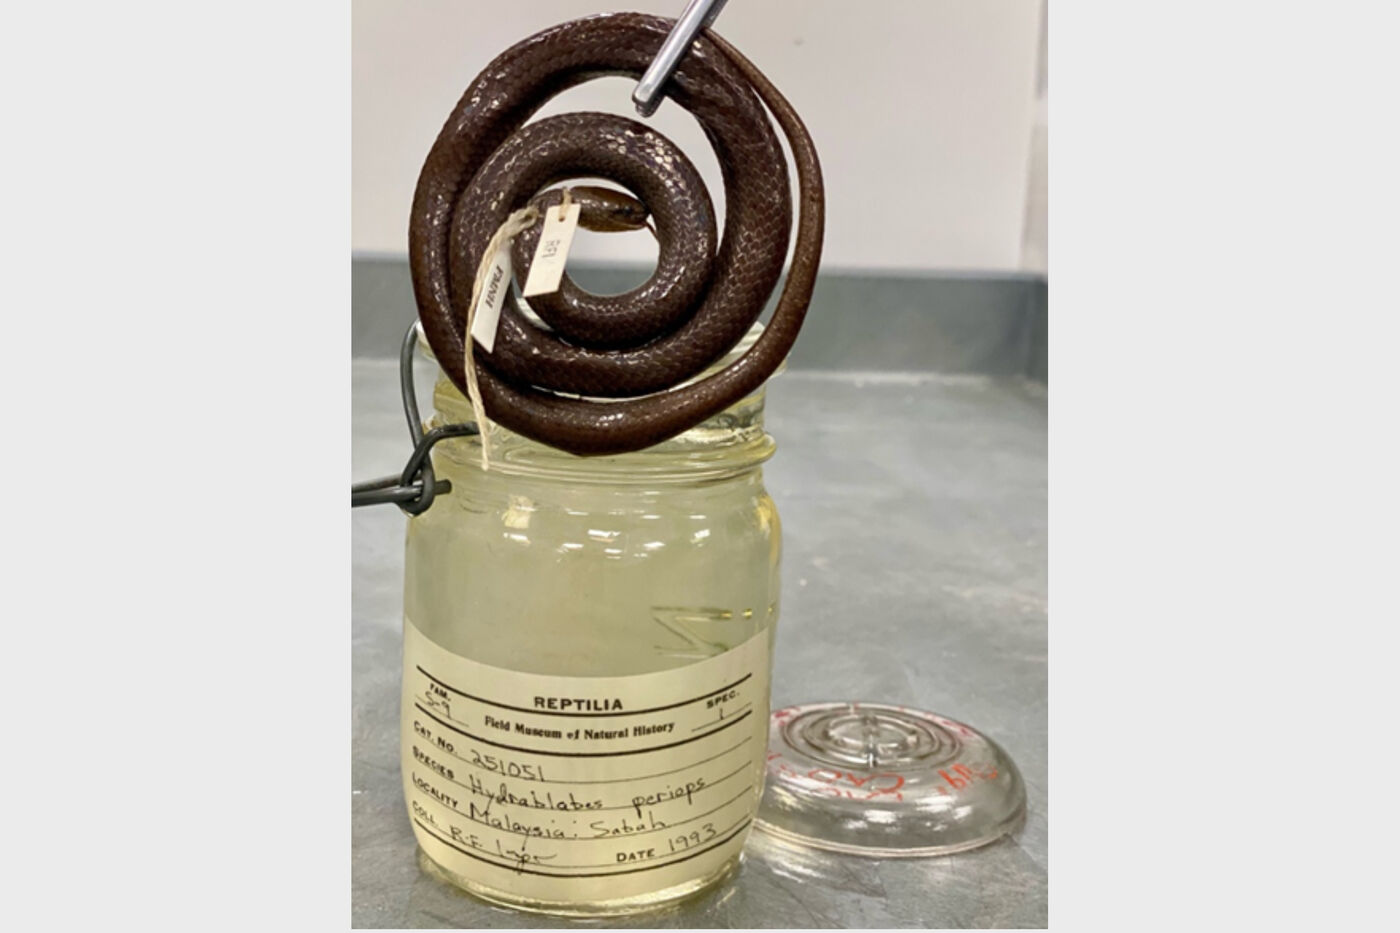 A decade's old snake specimen being held with metal forceps over a jar. The jar is labeled with details about the specimen and the jar's lid sits beside.